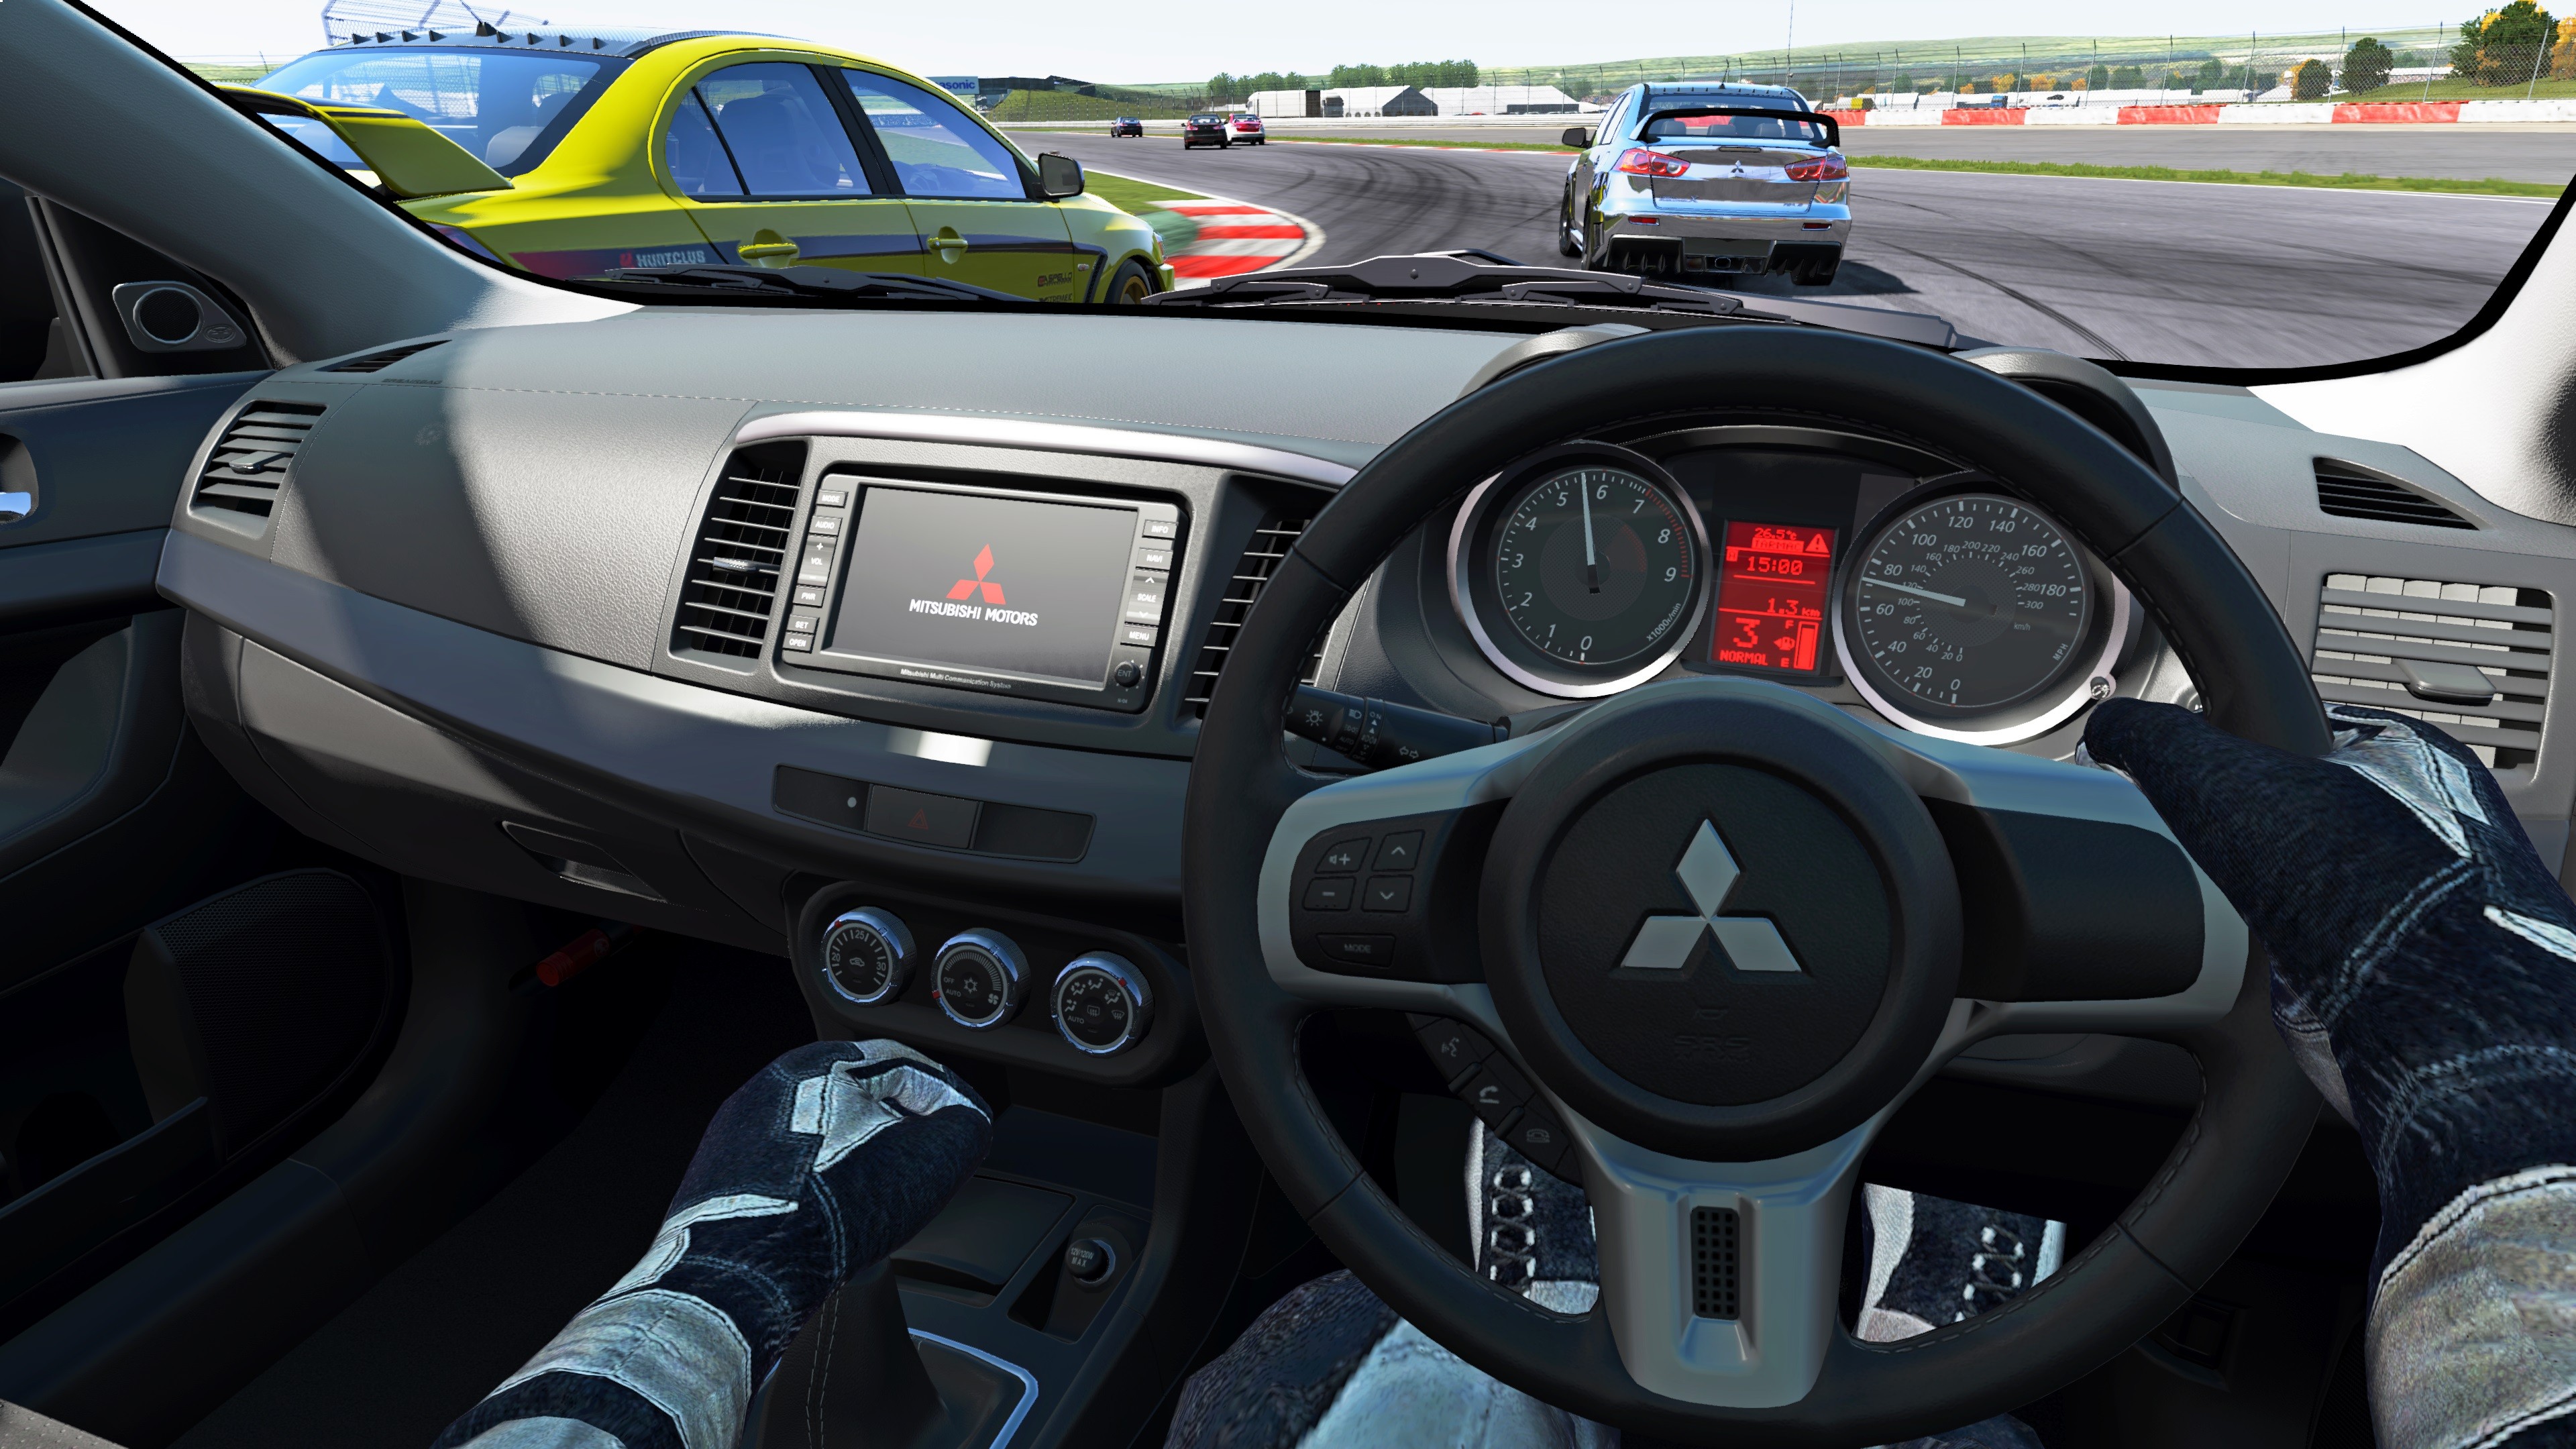 driveclub pc requirements